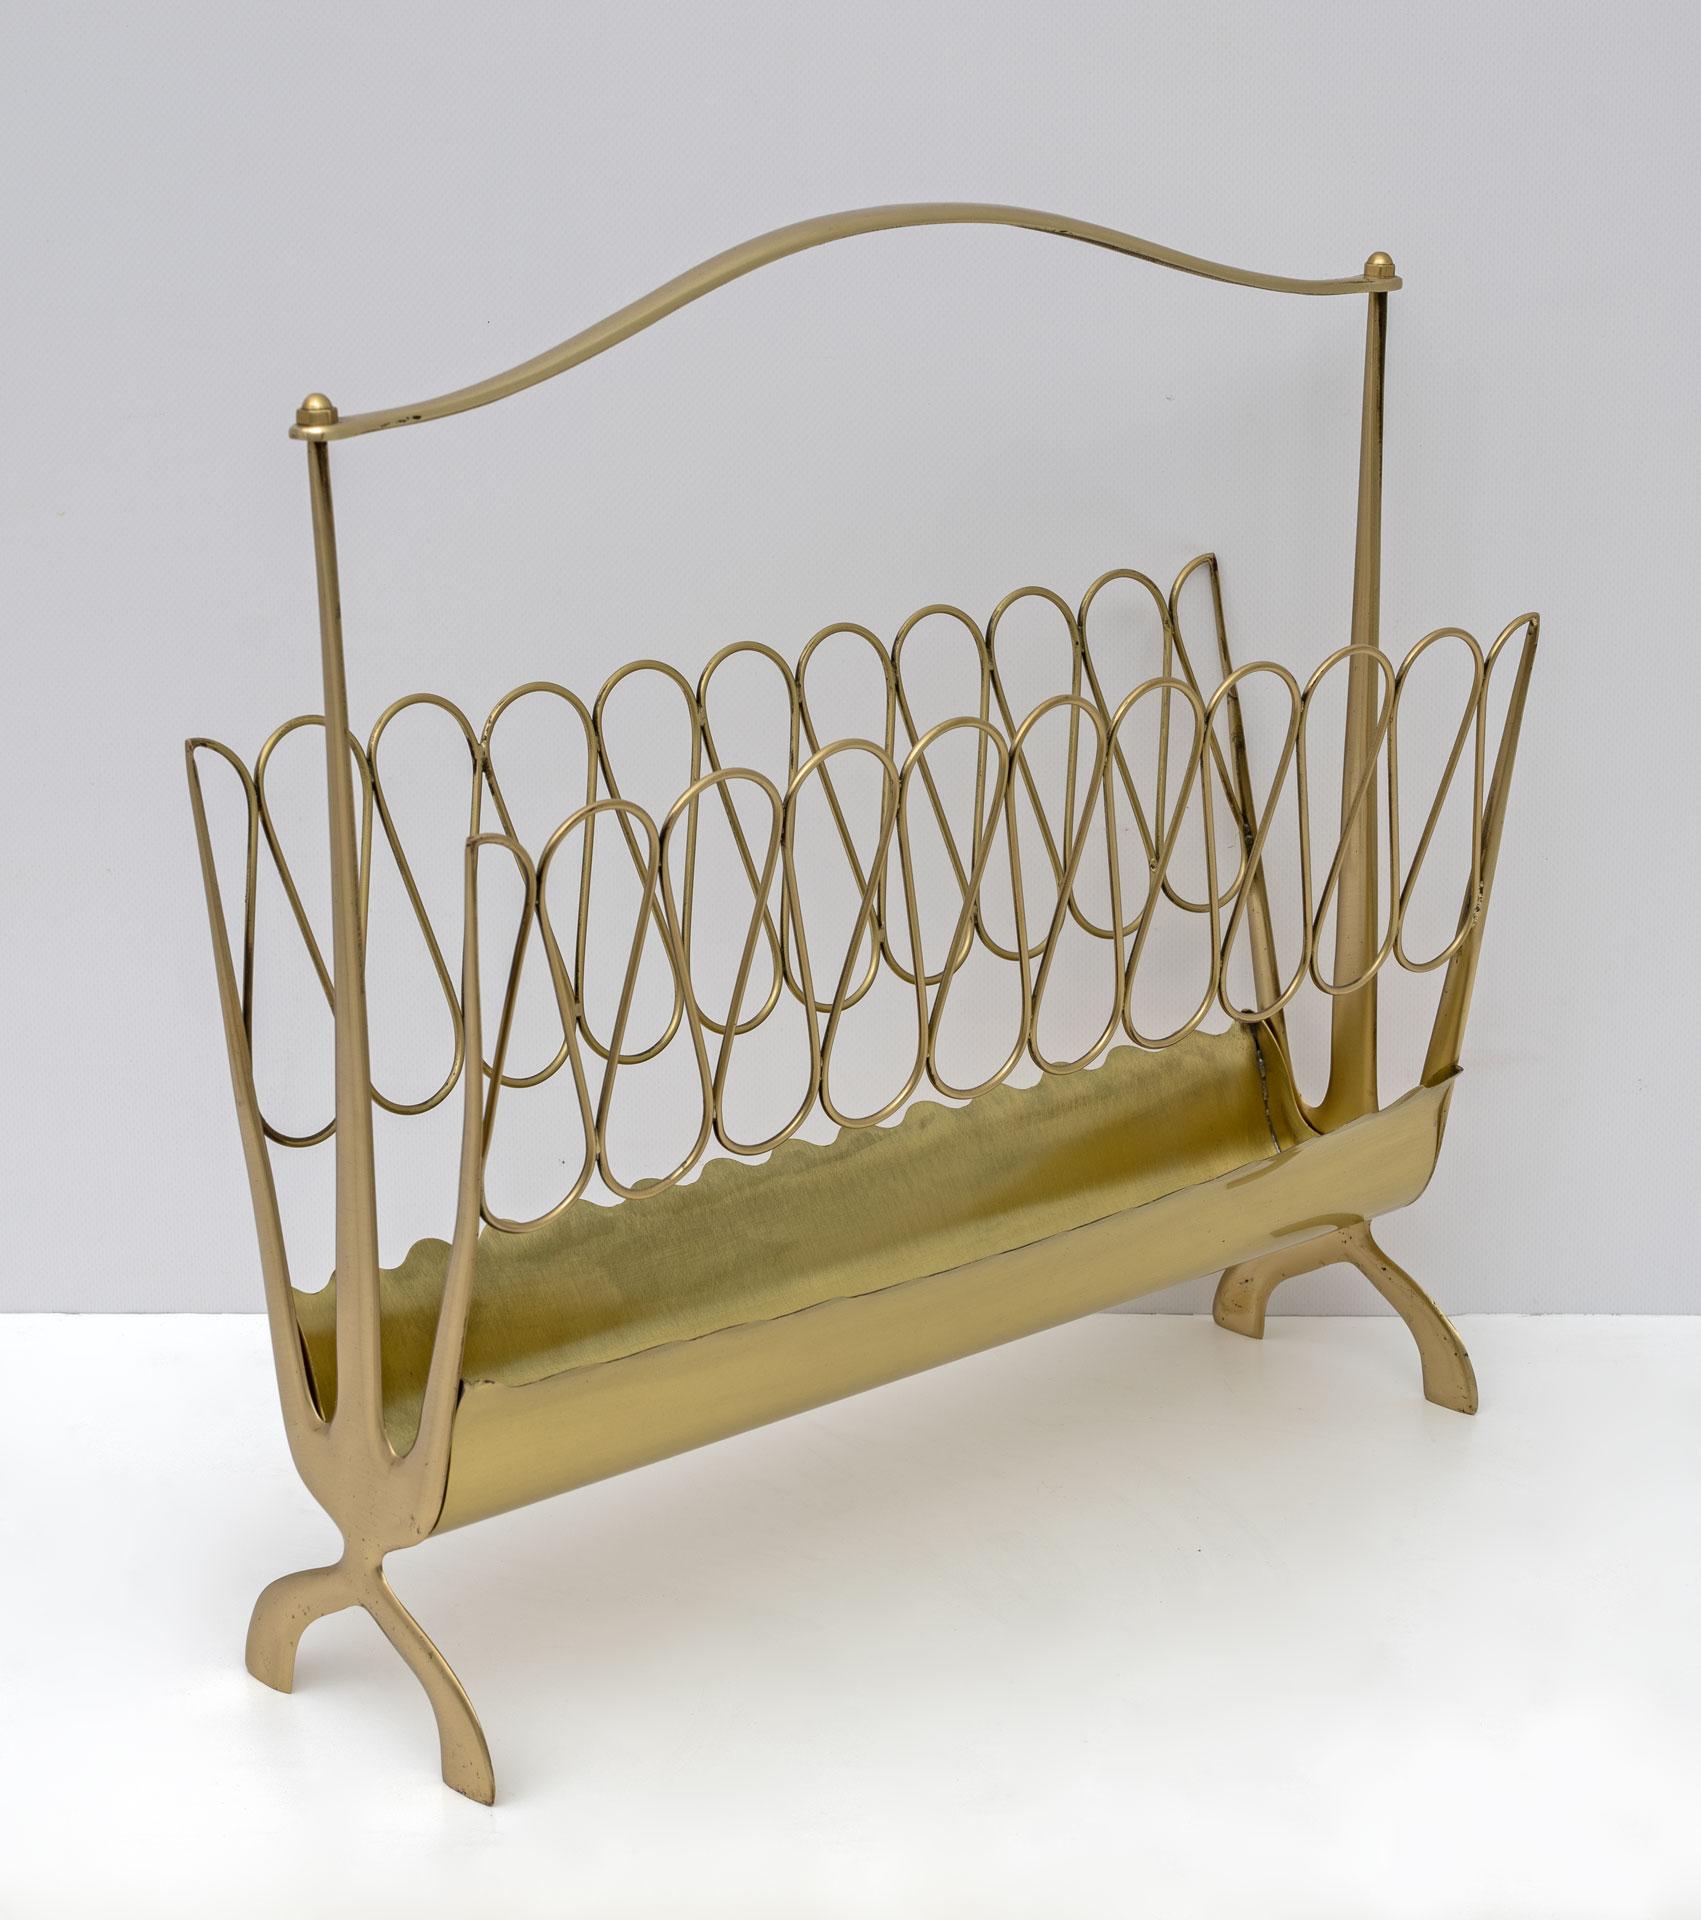 An elegant Mid-Century modern brass magazine rack attributed to Osvaldo Borsani with curved sides and carrying handle resting on two V-shaped feet, professionally polished and will not tarnish.